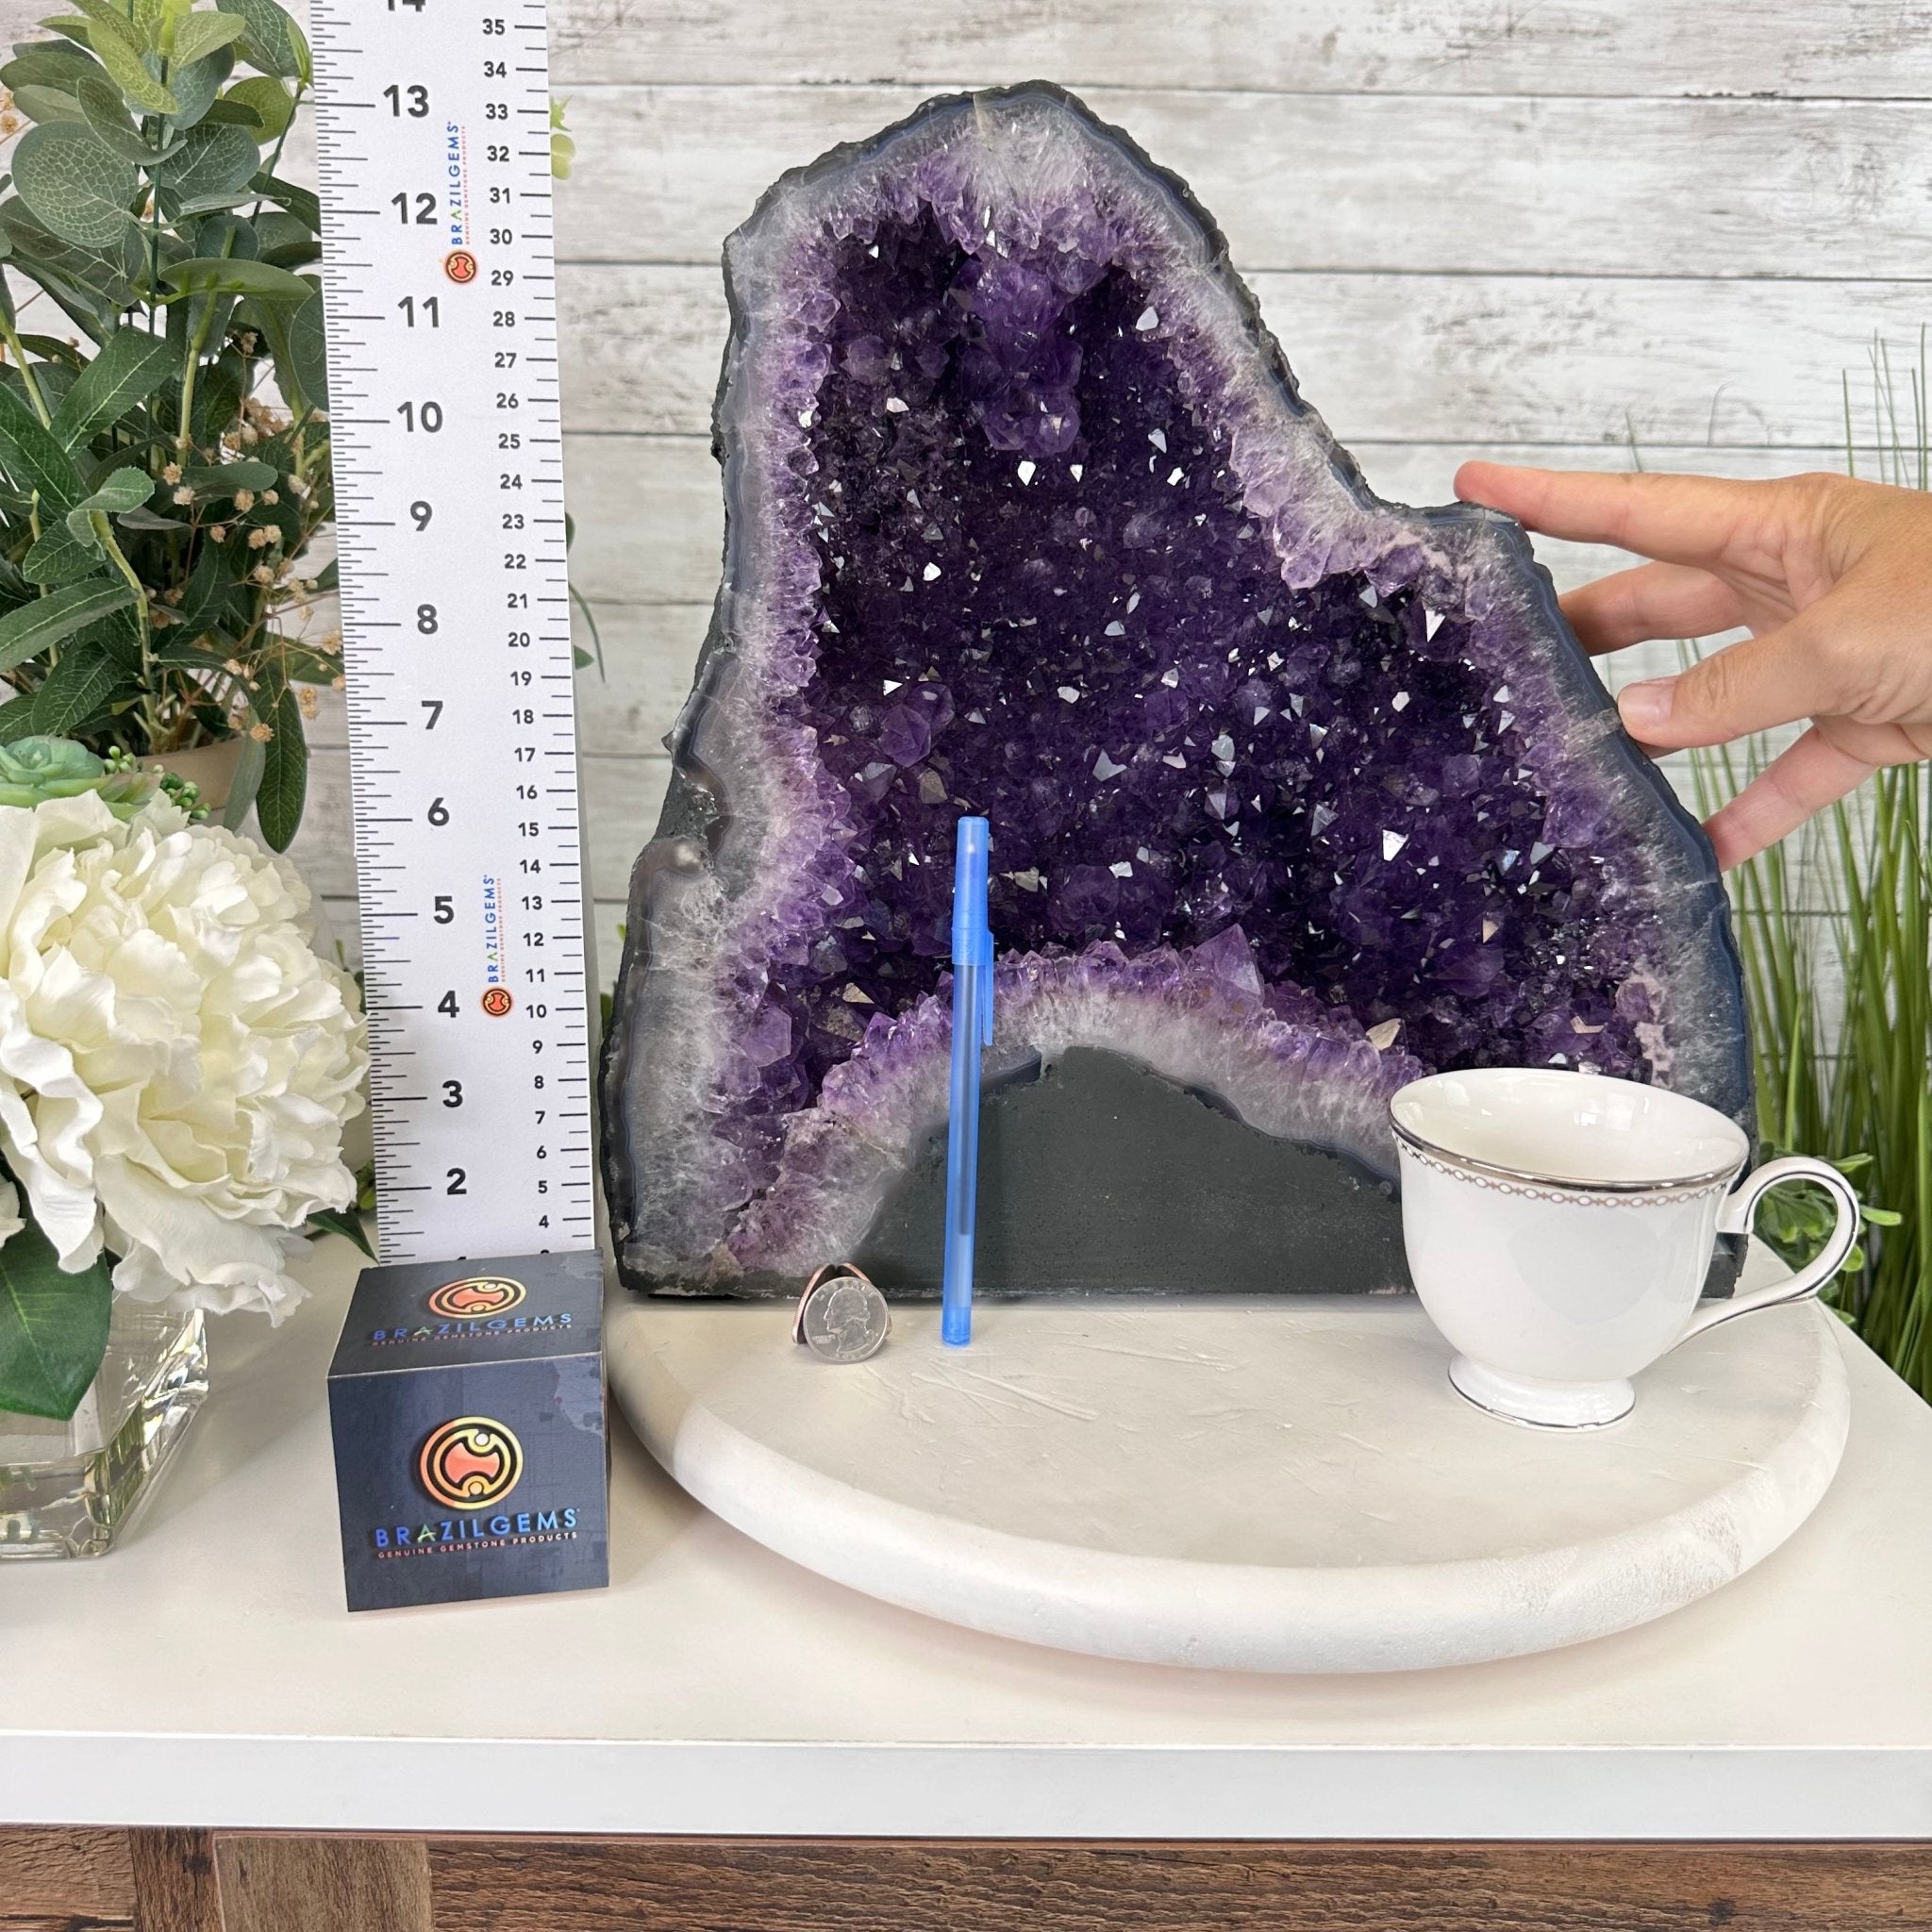 Extra Plus Quality Brazilian Amethyst Cathedral, 32.6 lbs & 13.1" Tall, Model #5601-0876 by Brazil Gems - Brazil GemsBrazil GemsExtra Plus Quality Brazilian Amethyst Cathedral, 32.6 lbs & 13.1" Tall, Model #5601-0876 by Brazil GemsCathedrals5601-0876